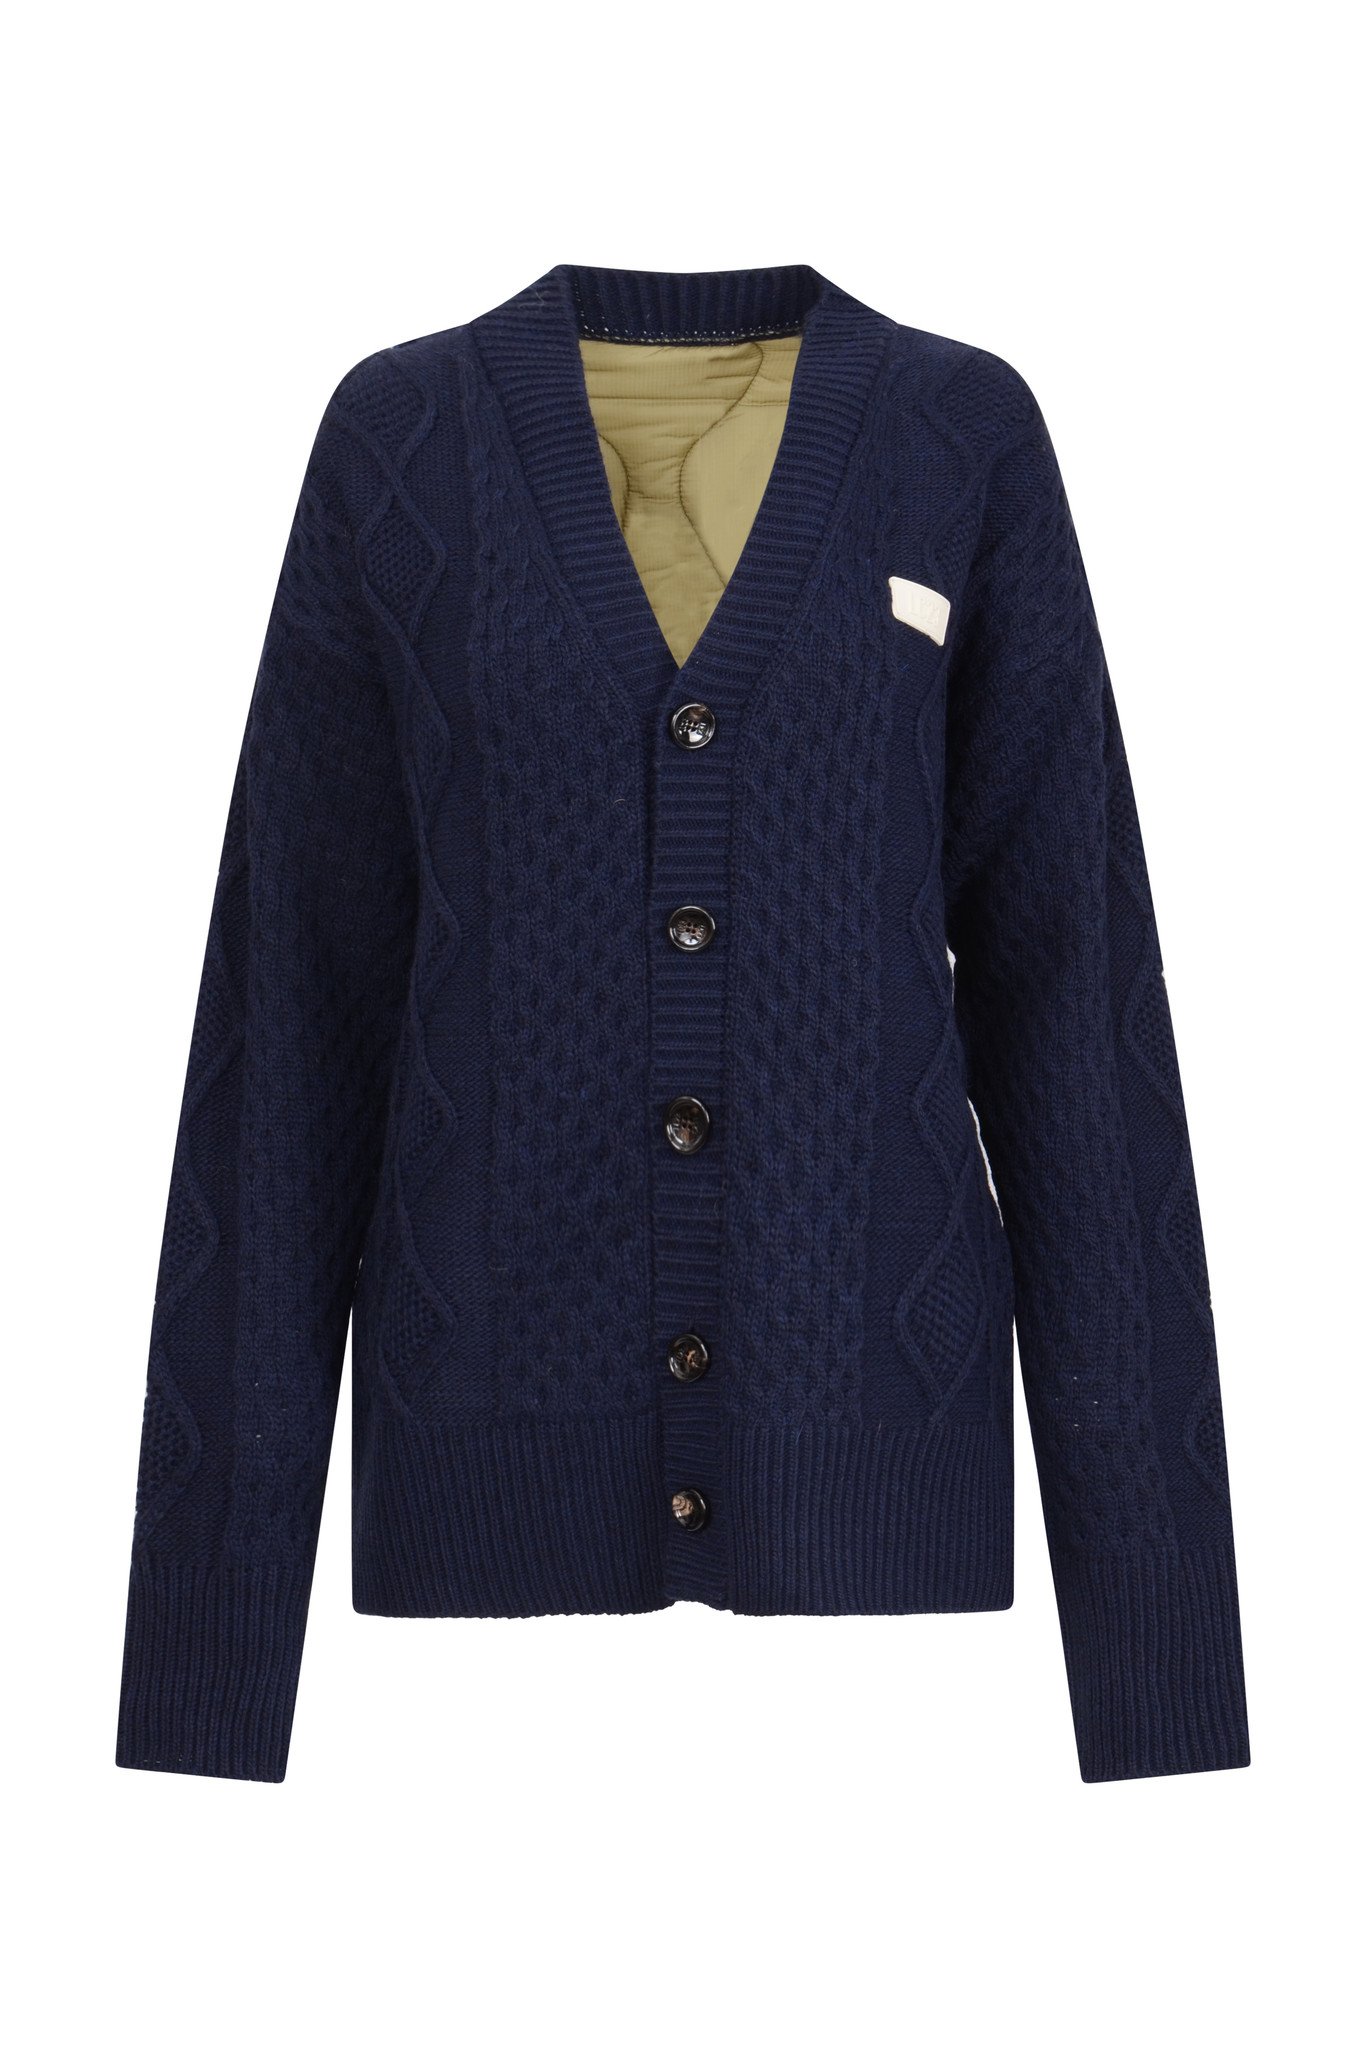 QUILTED CARDIGAN IN NAVY-1